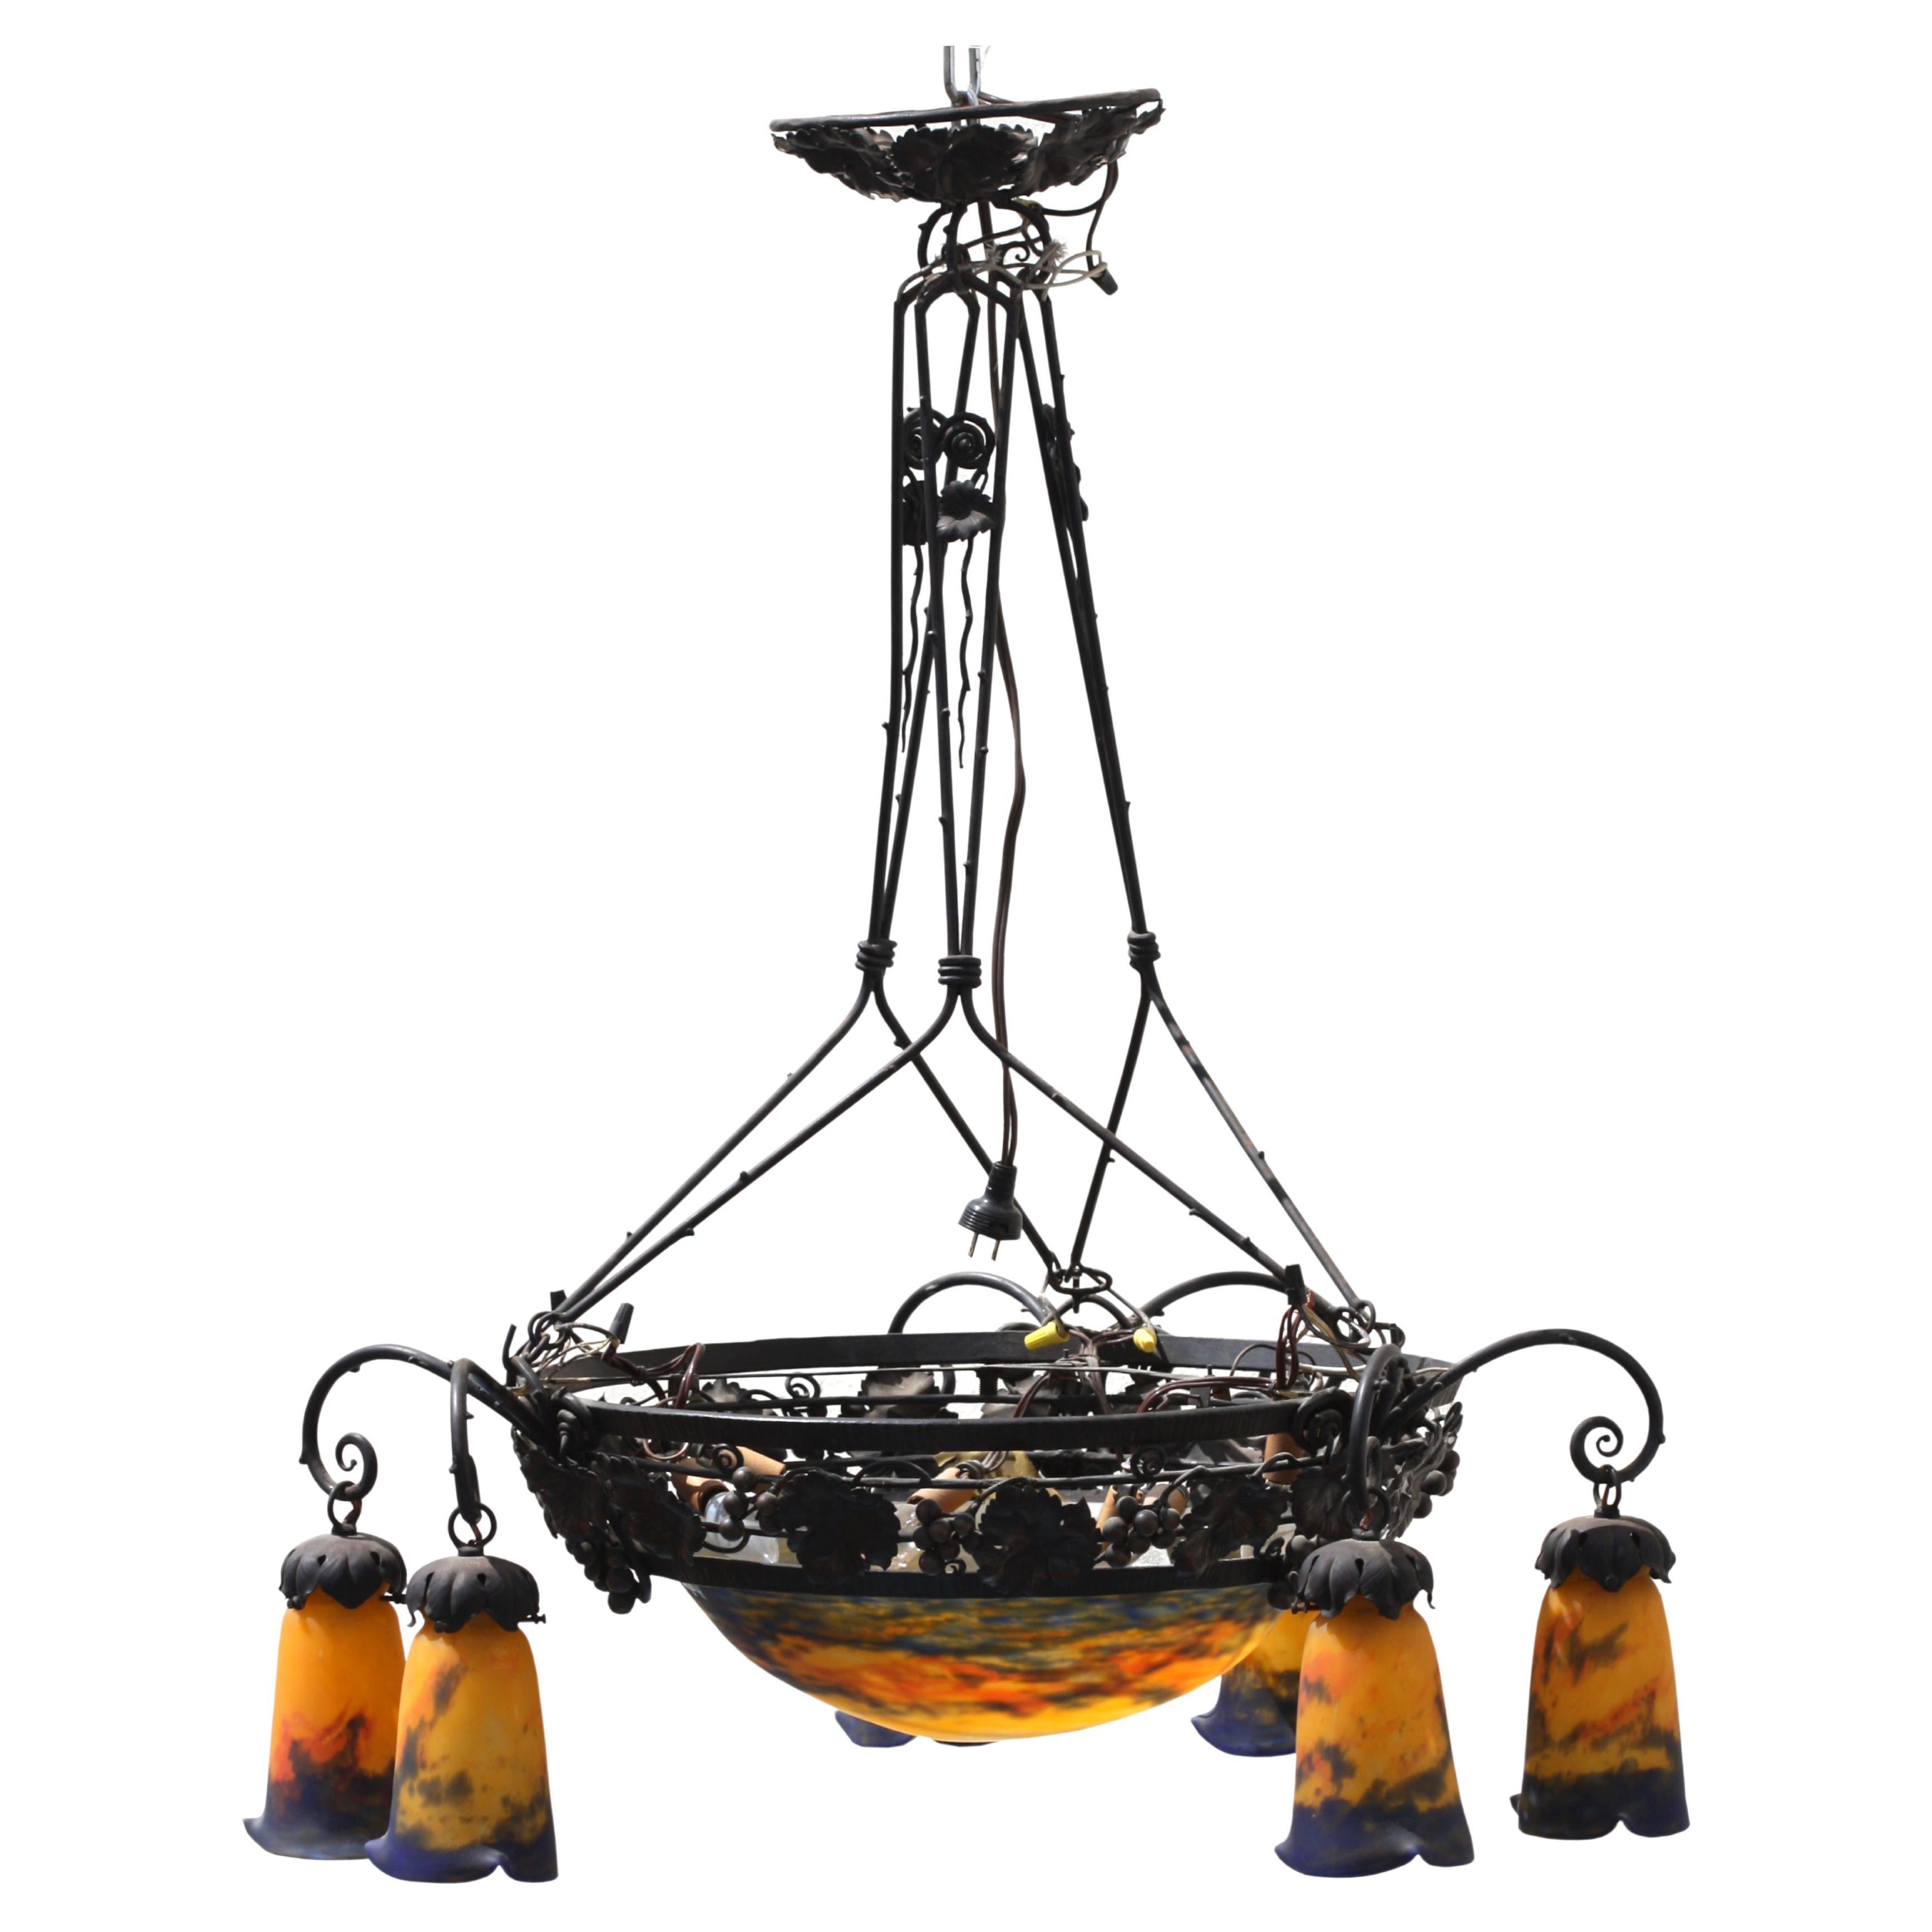 Art Deco Wrought Iron and Müller Freres Moulded Glass Chandelier For Sale